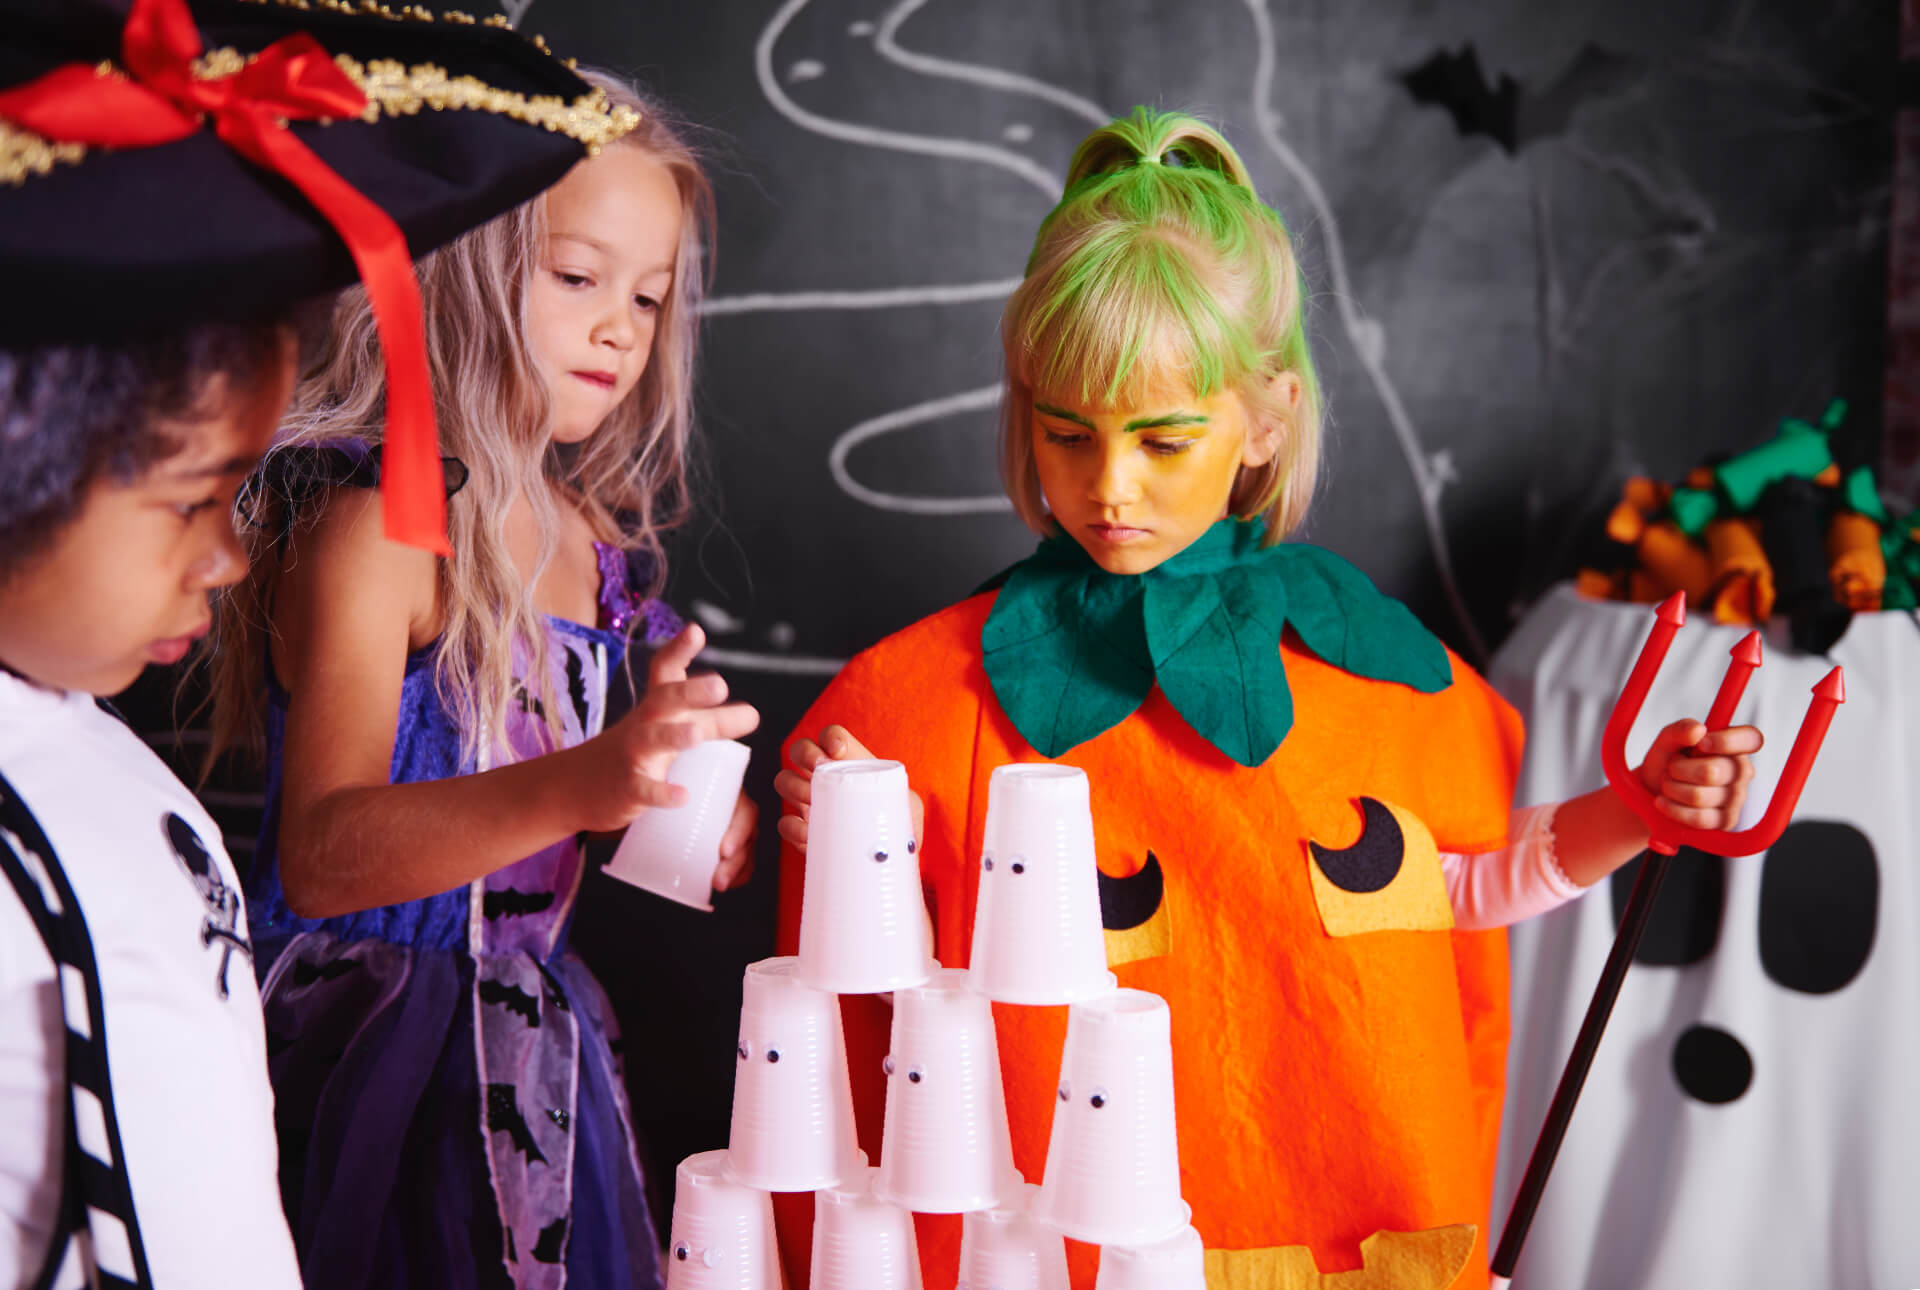 Carving pumpkins, spooky decorations, and safe trick-or-treat alternatives: The ultimate Halloween guide for families.